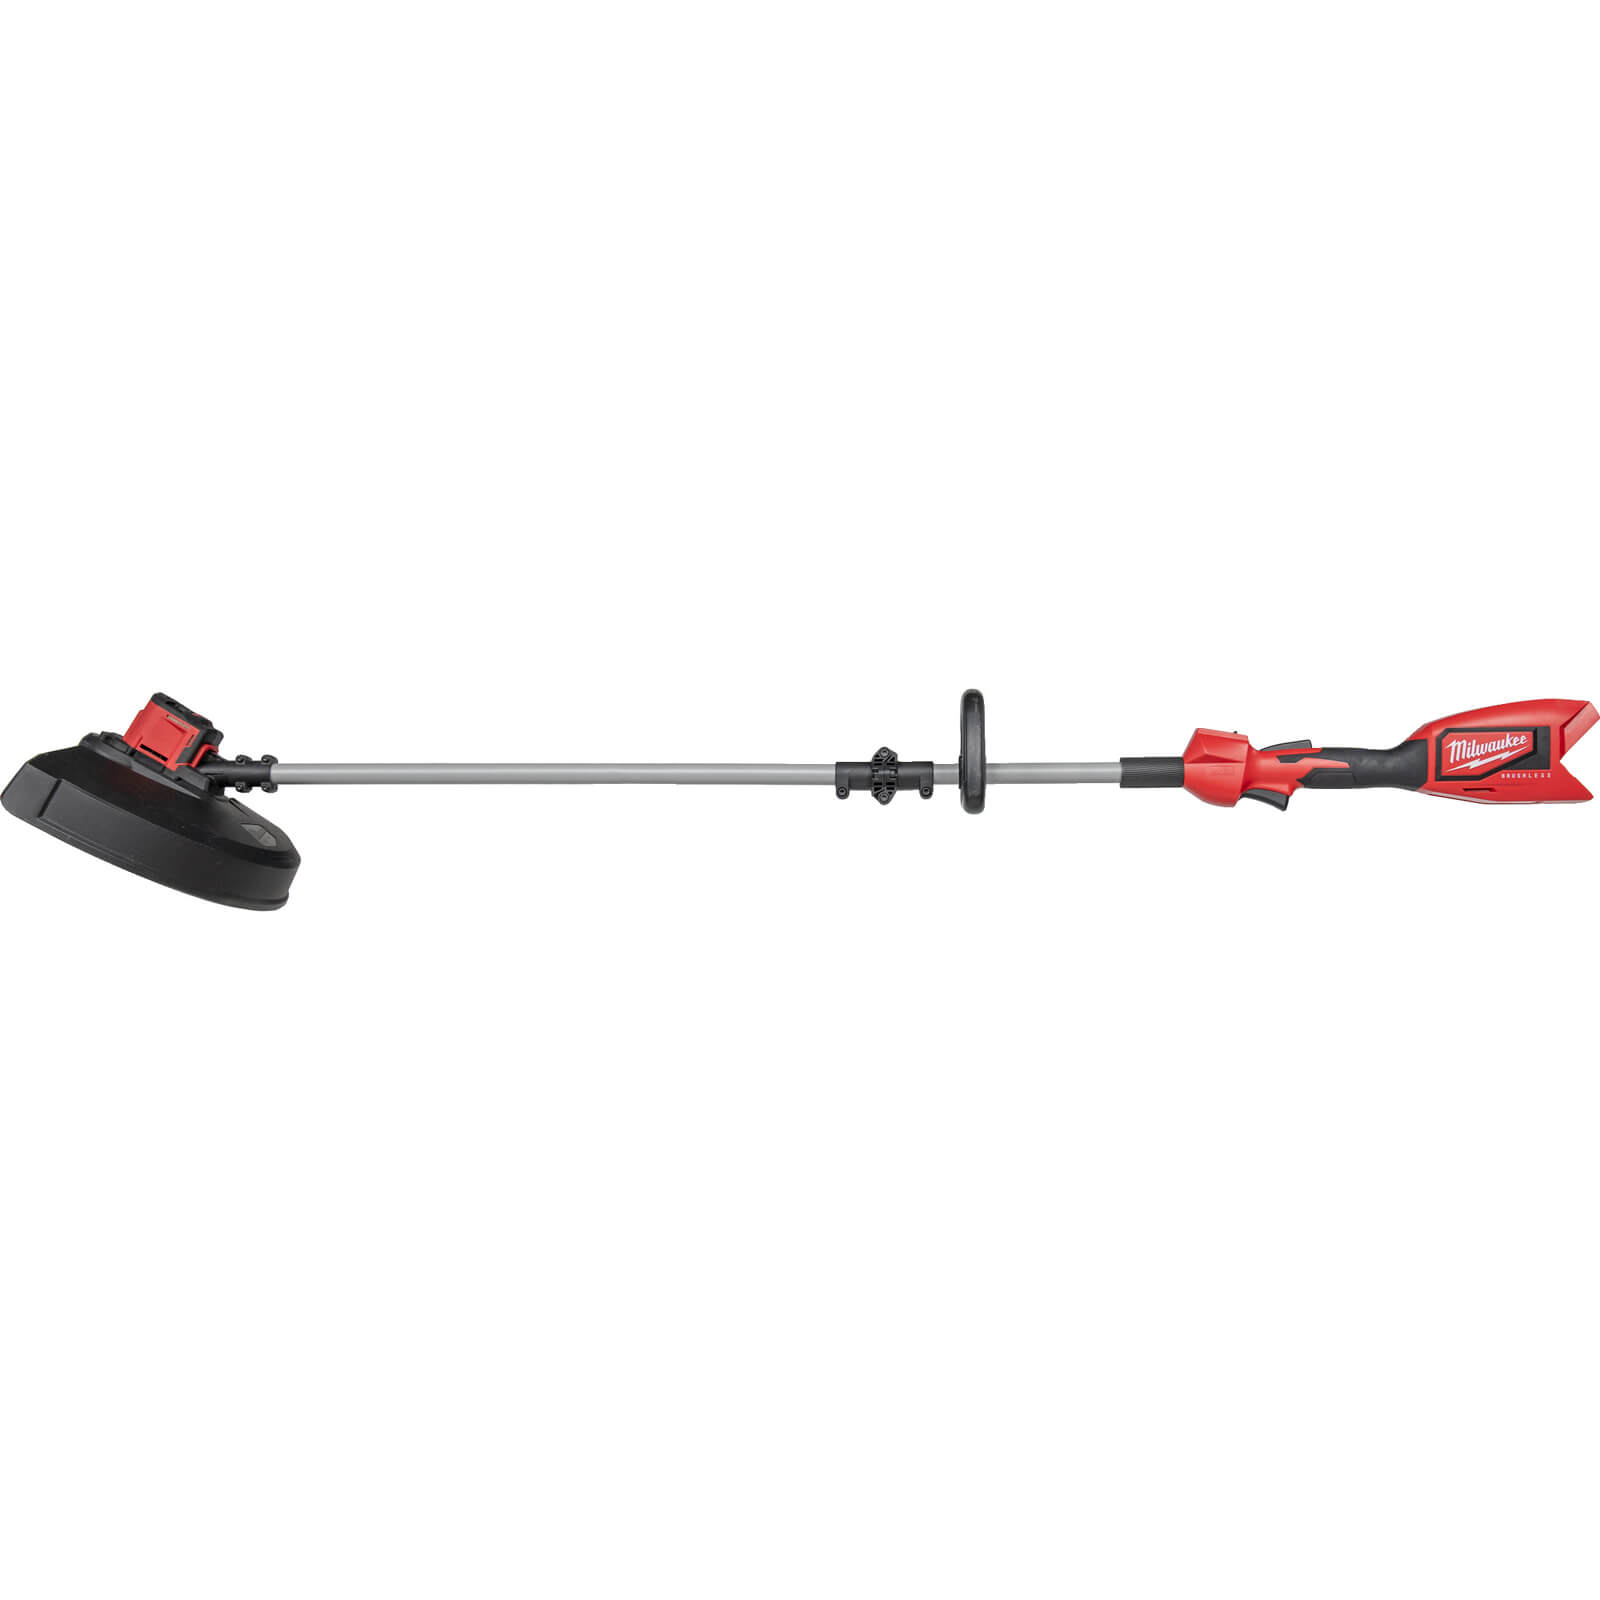 Image of Milwaukee M18 BLLT 18v Cordless Brushless Grass Trimmer 400mm No Batteries No Charger